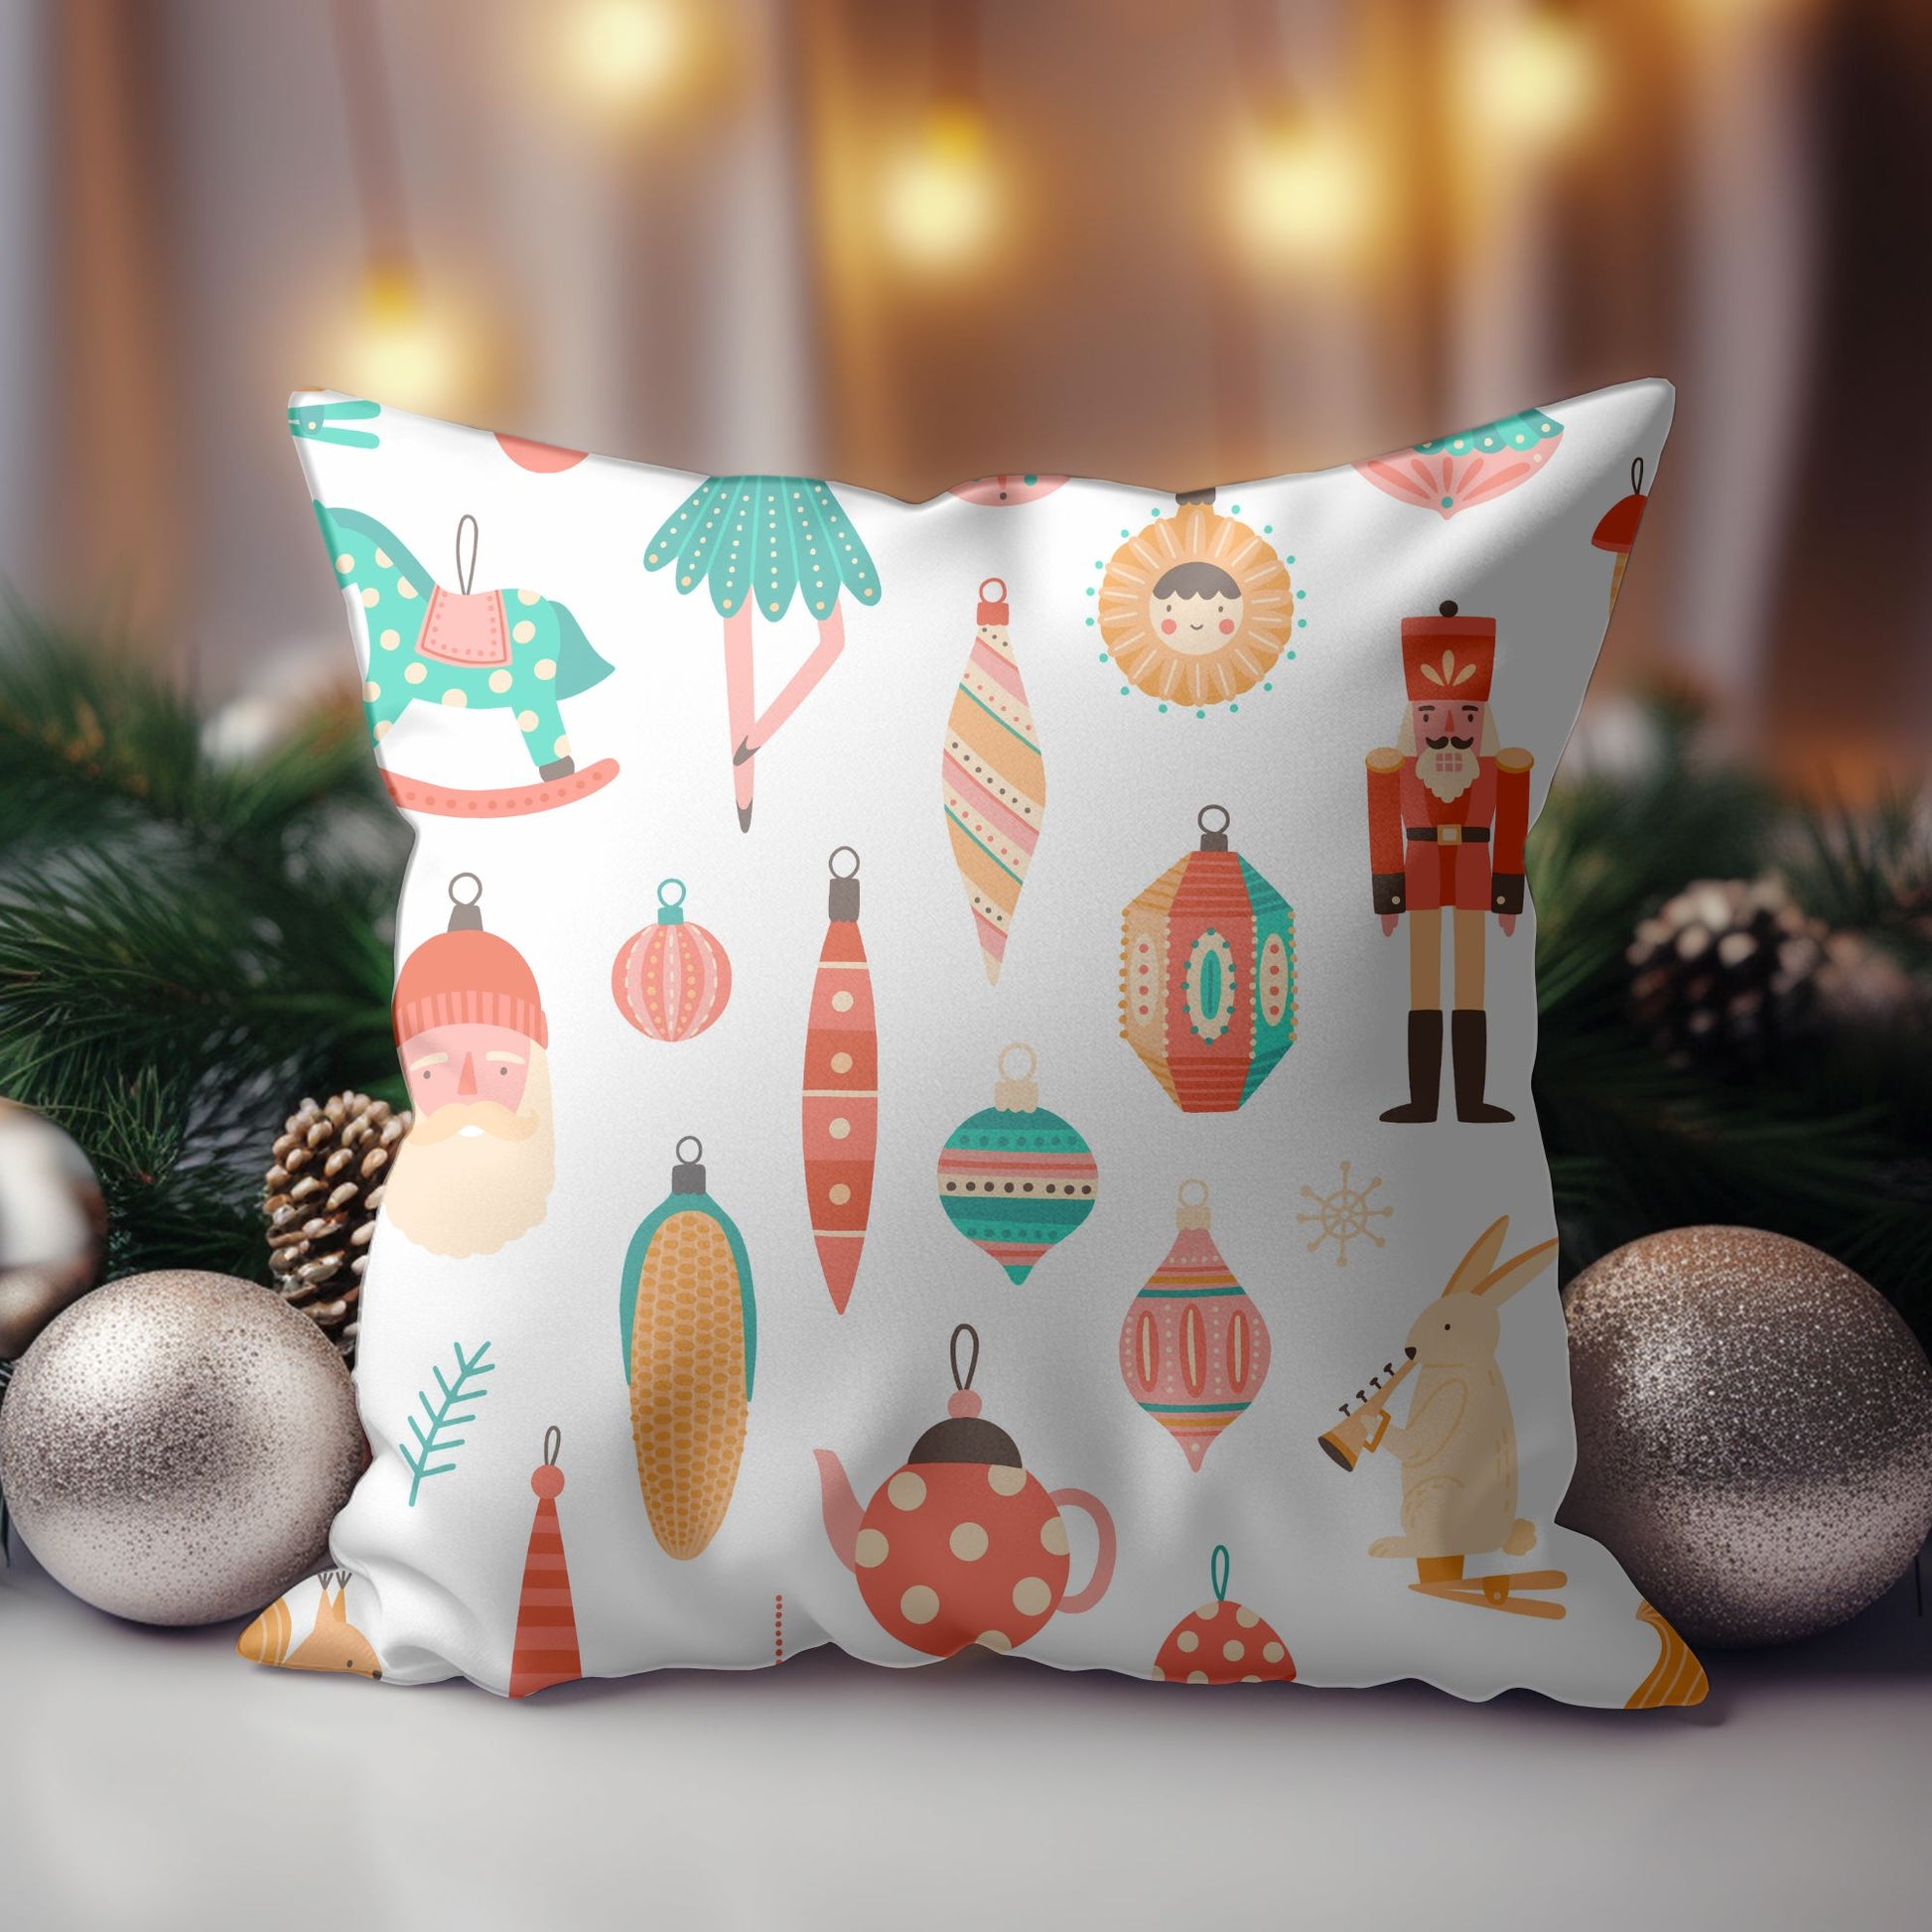 Winter Wonderland Cushion Cover - Front View